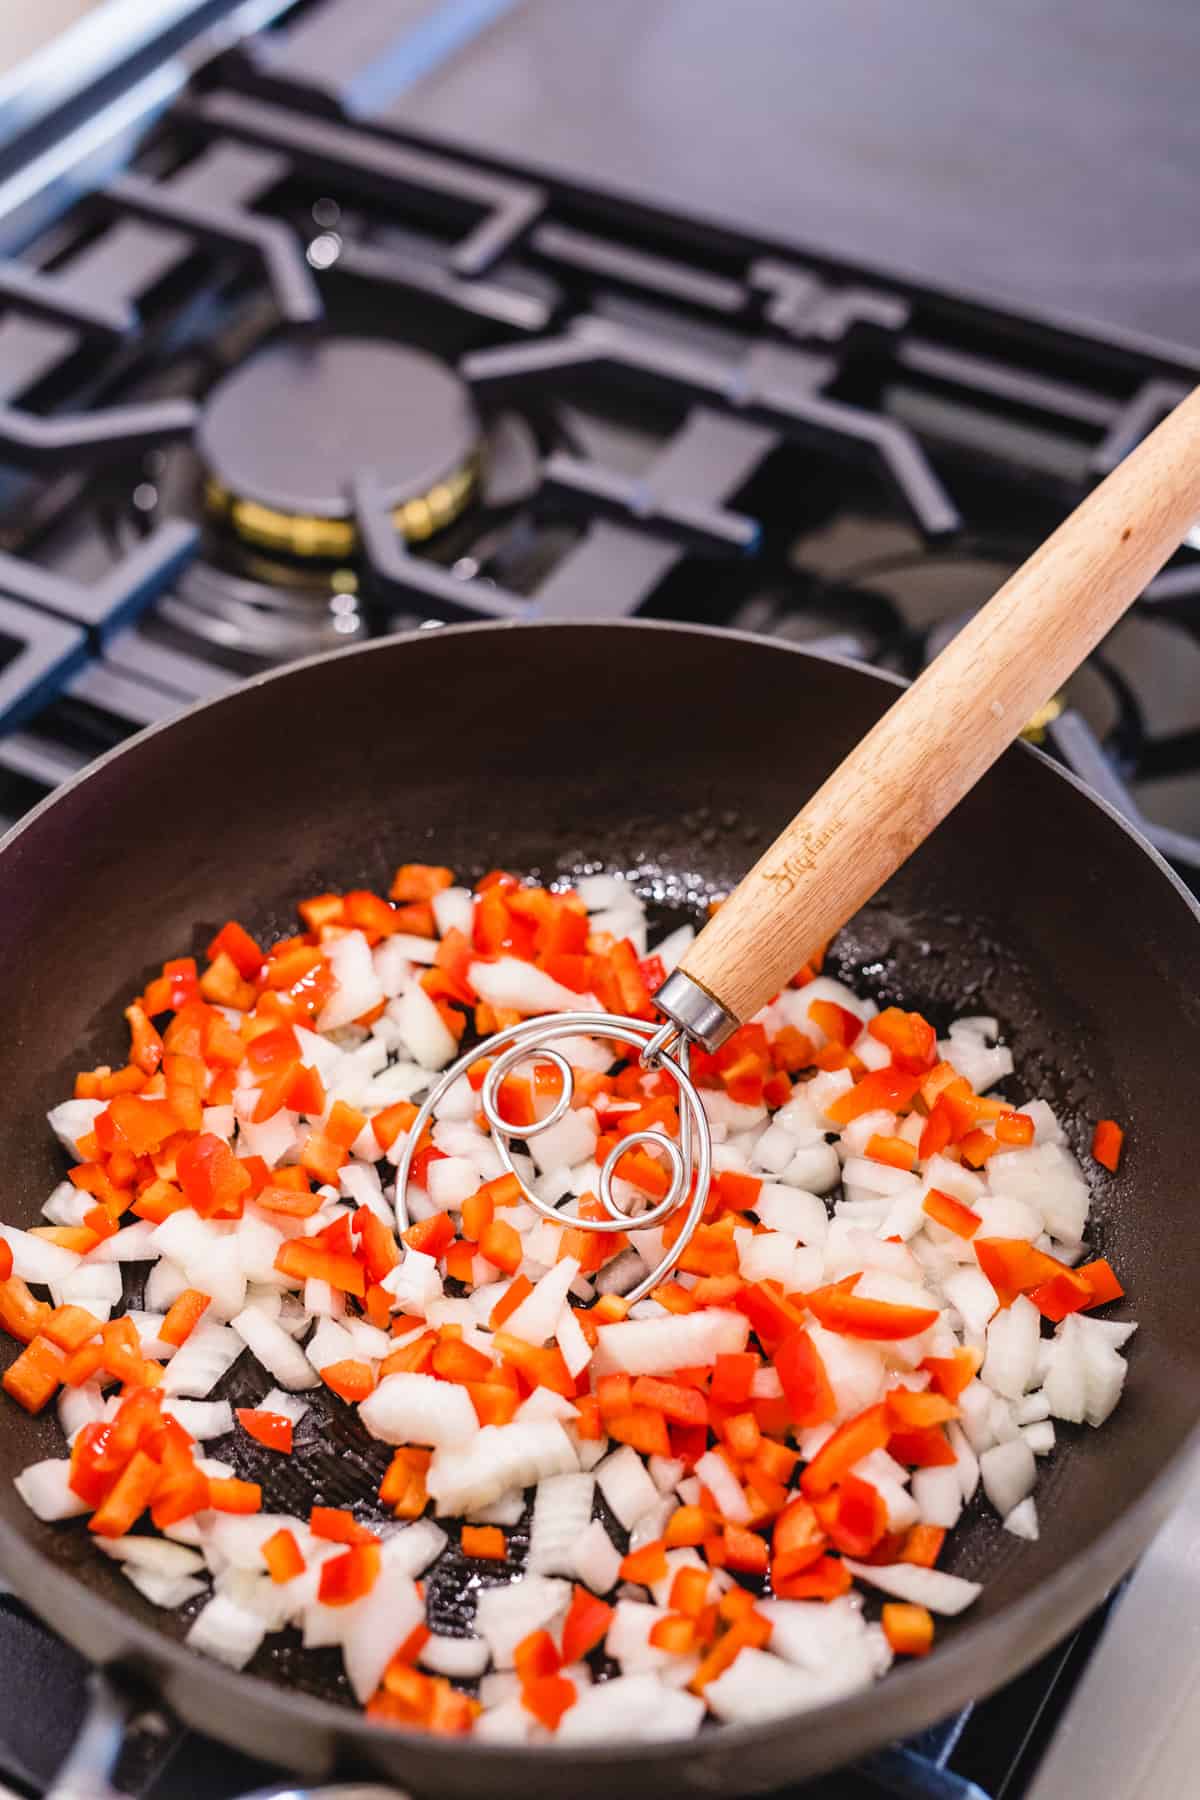 Chopped onion and red pepper sits in a pan on top of a stove.